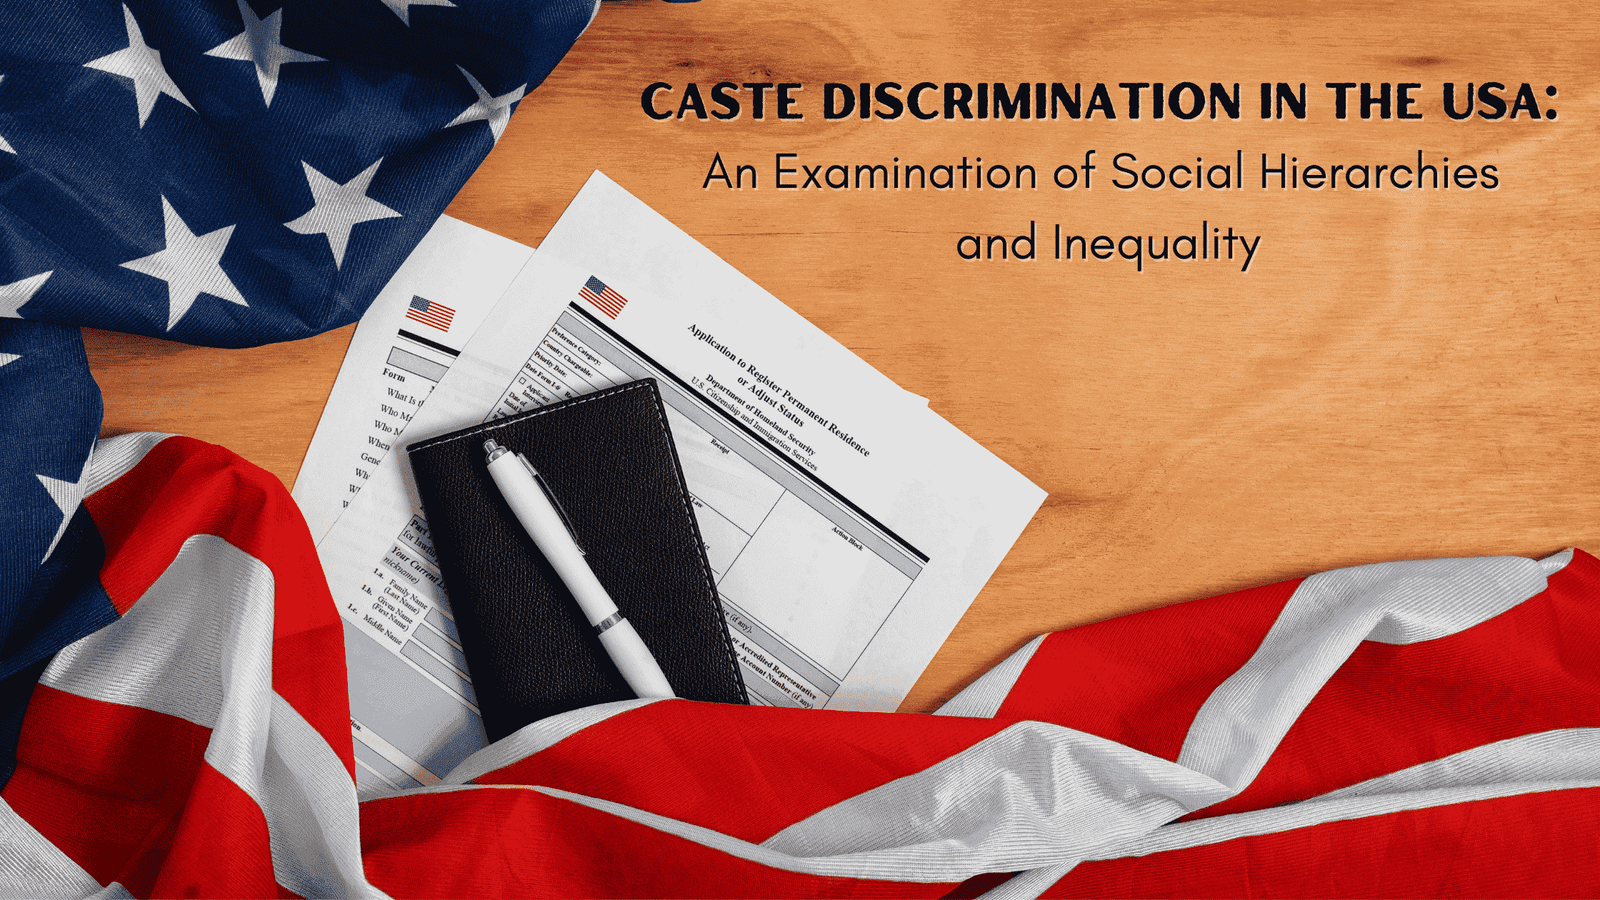 Caste Discrimination in the USA: An Examination of Social Hierarchies and Inequality